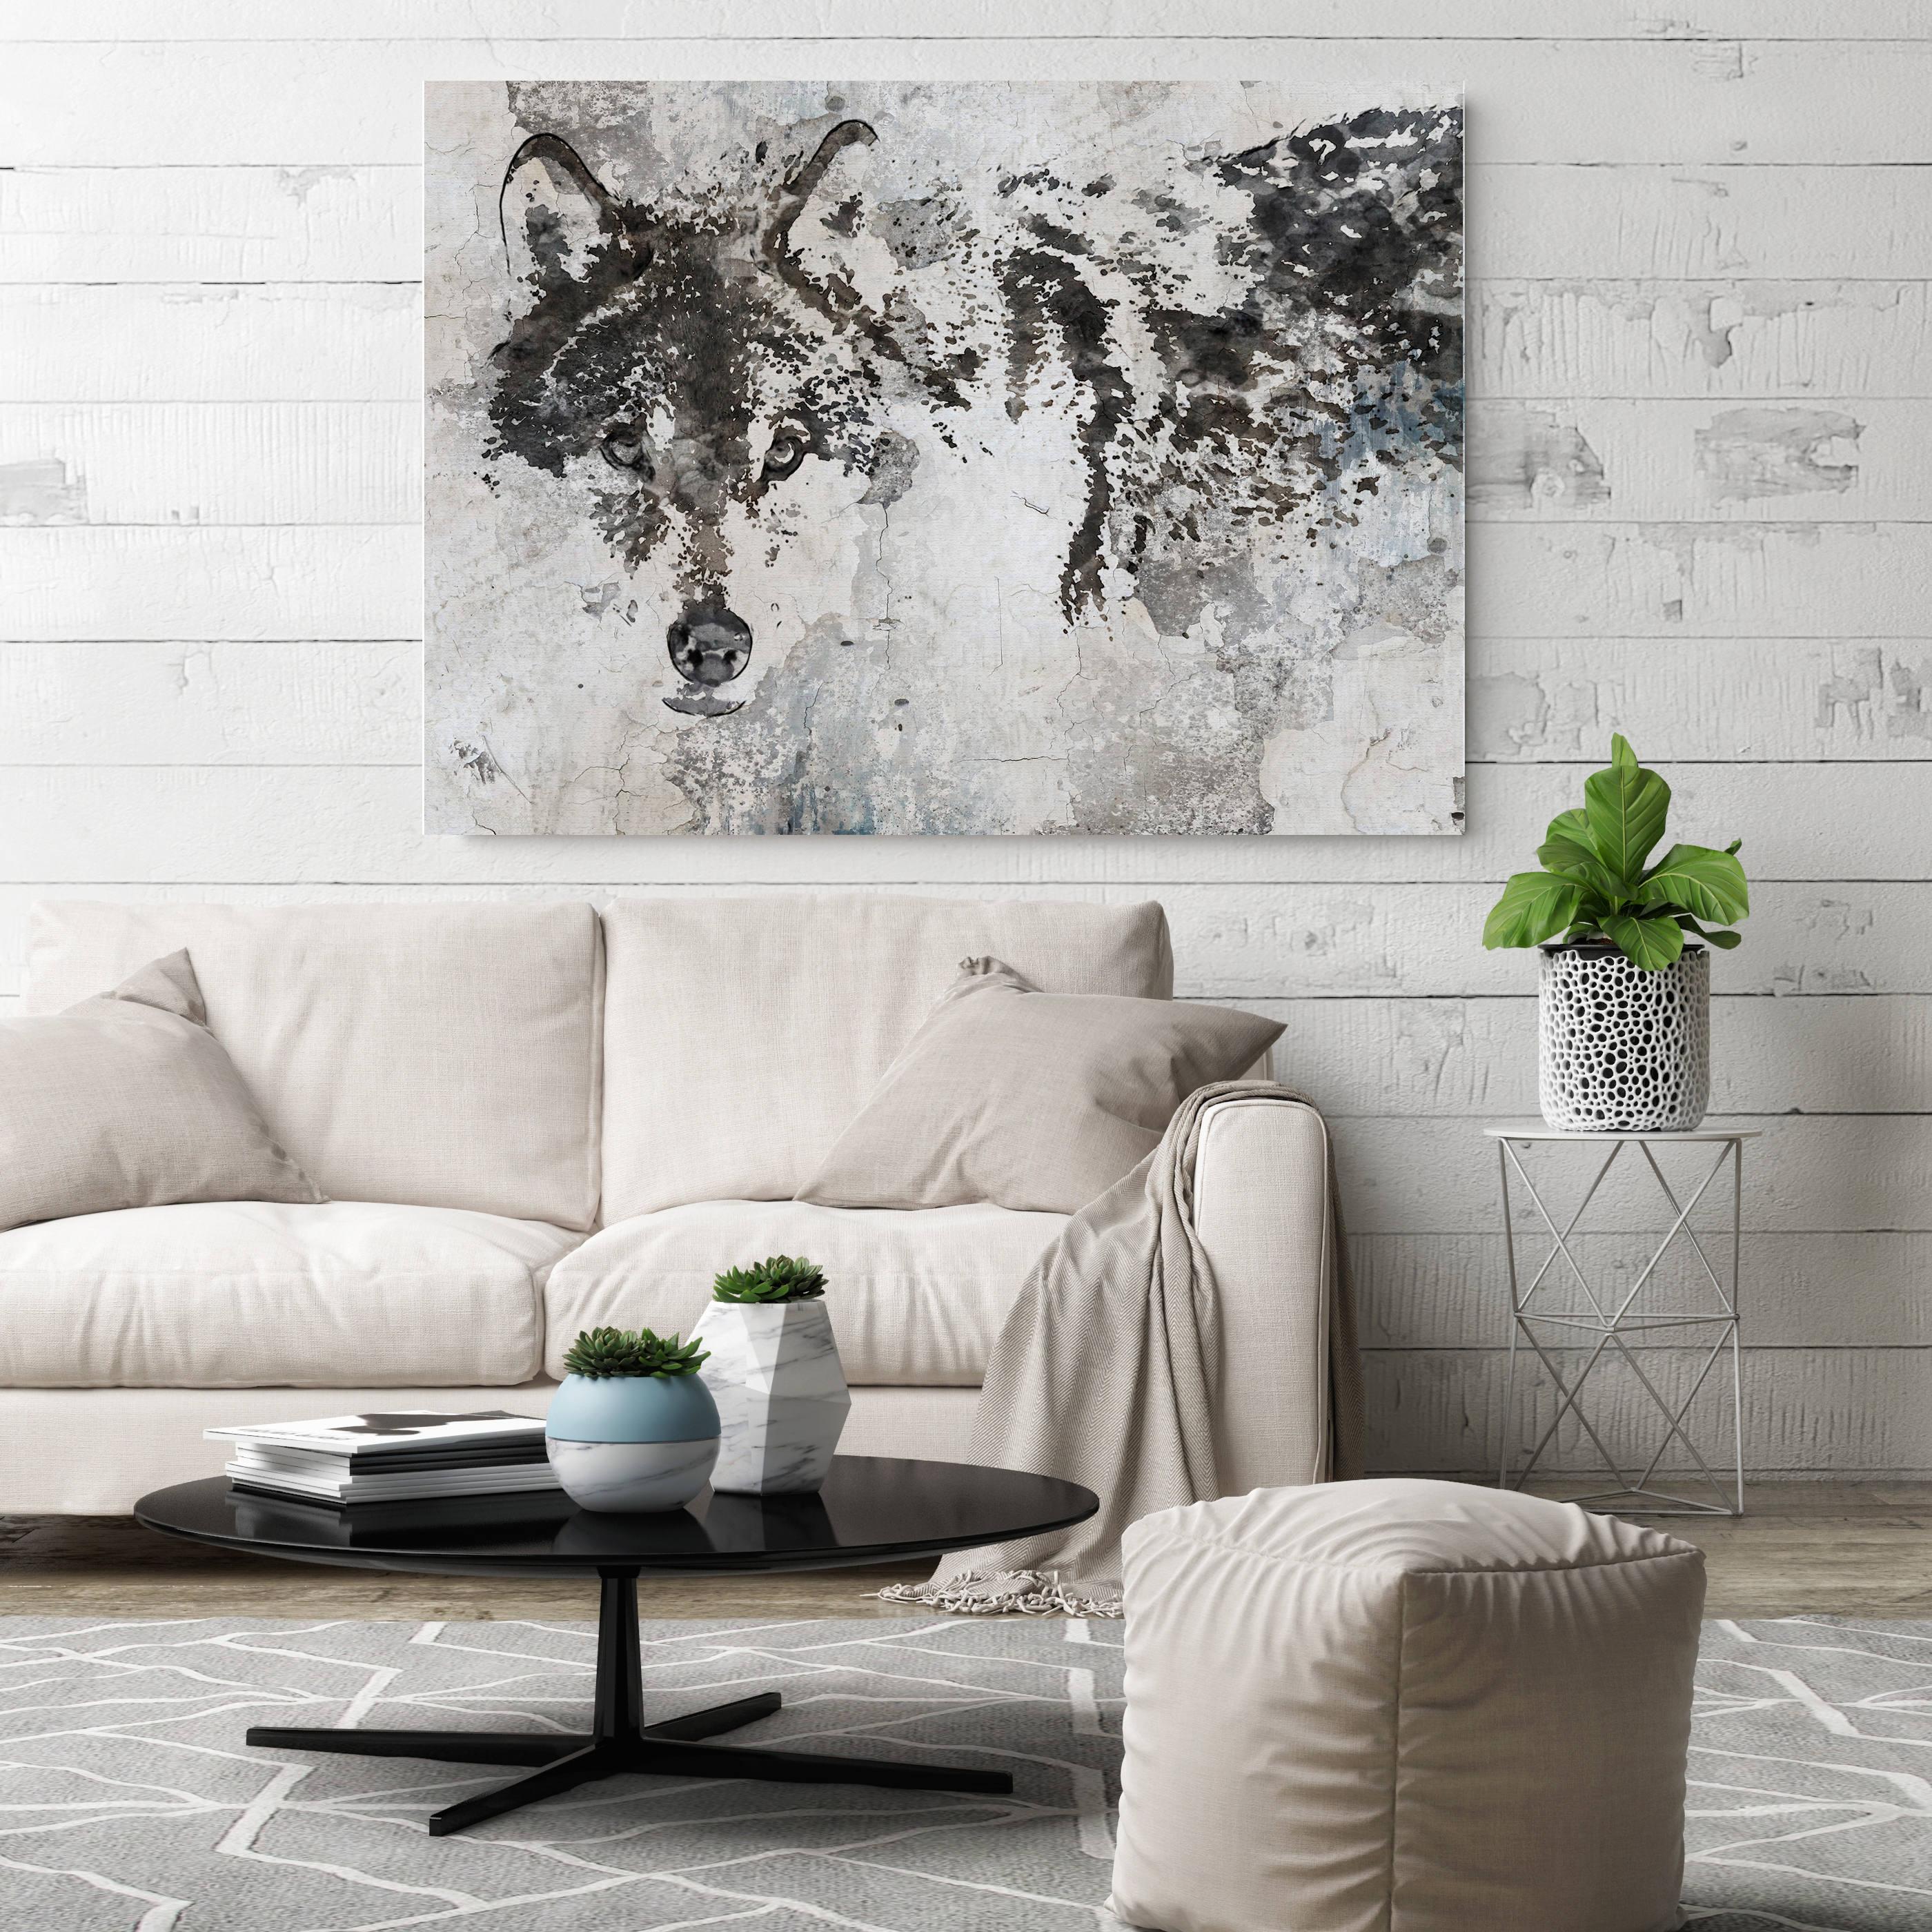 Wolf Rustic Painting Hand Embellished Textured Giclee on Canvas, 60